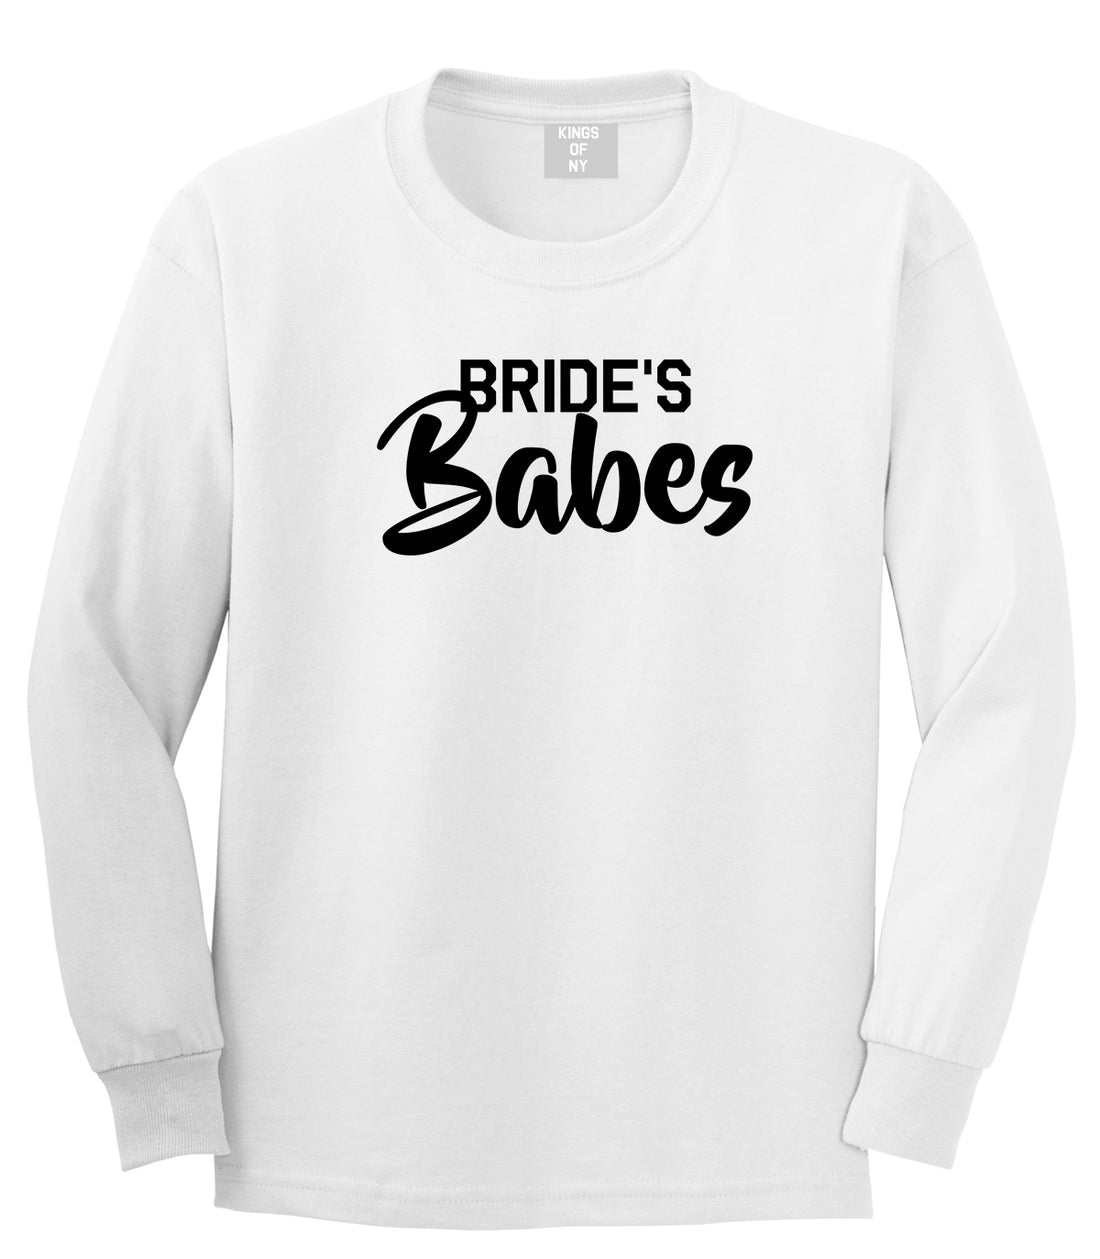 Brides Babes Wedding Mens White Long Sleeve T-Shirt by KINGS OF NY